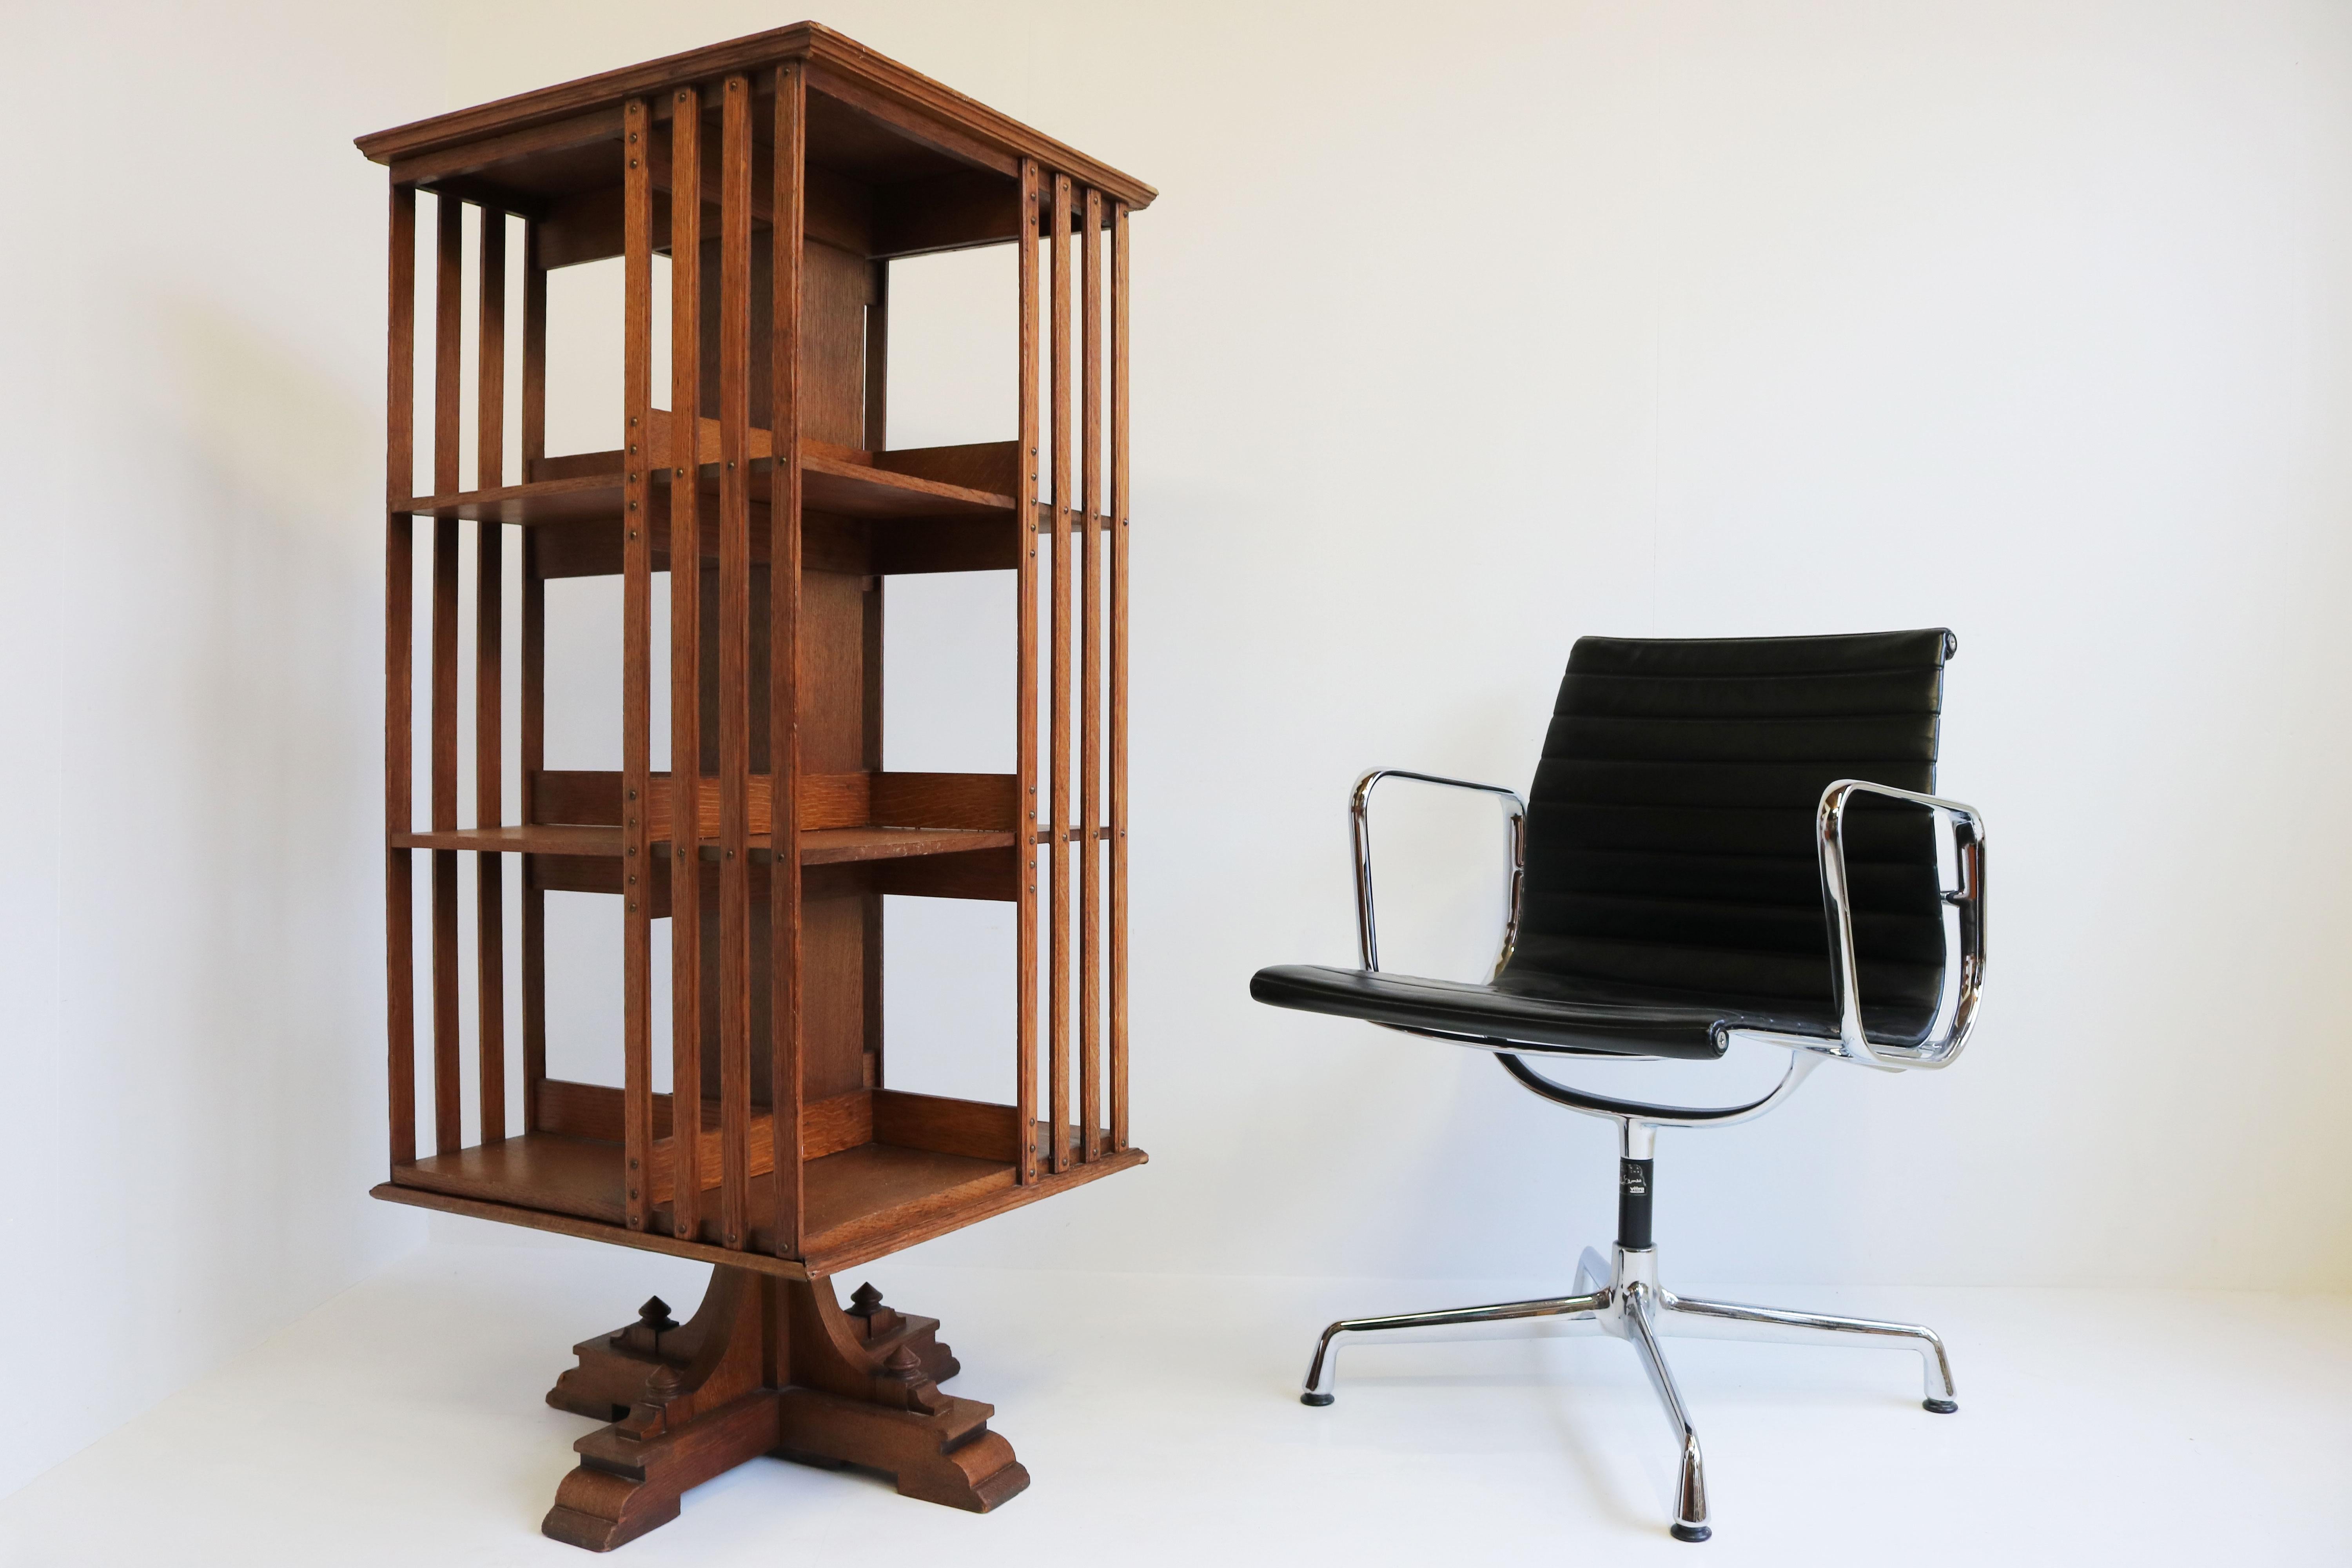 Stylish & impressive ! This rare large Art Deco rotating bookcase from France 1920. 
Gorgeous antique oak with a timeless Art Deco base. Decorate your office, living room or study with this marvelous antique! 
The bookcase rotates smoothly despite